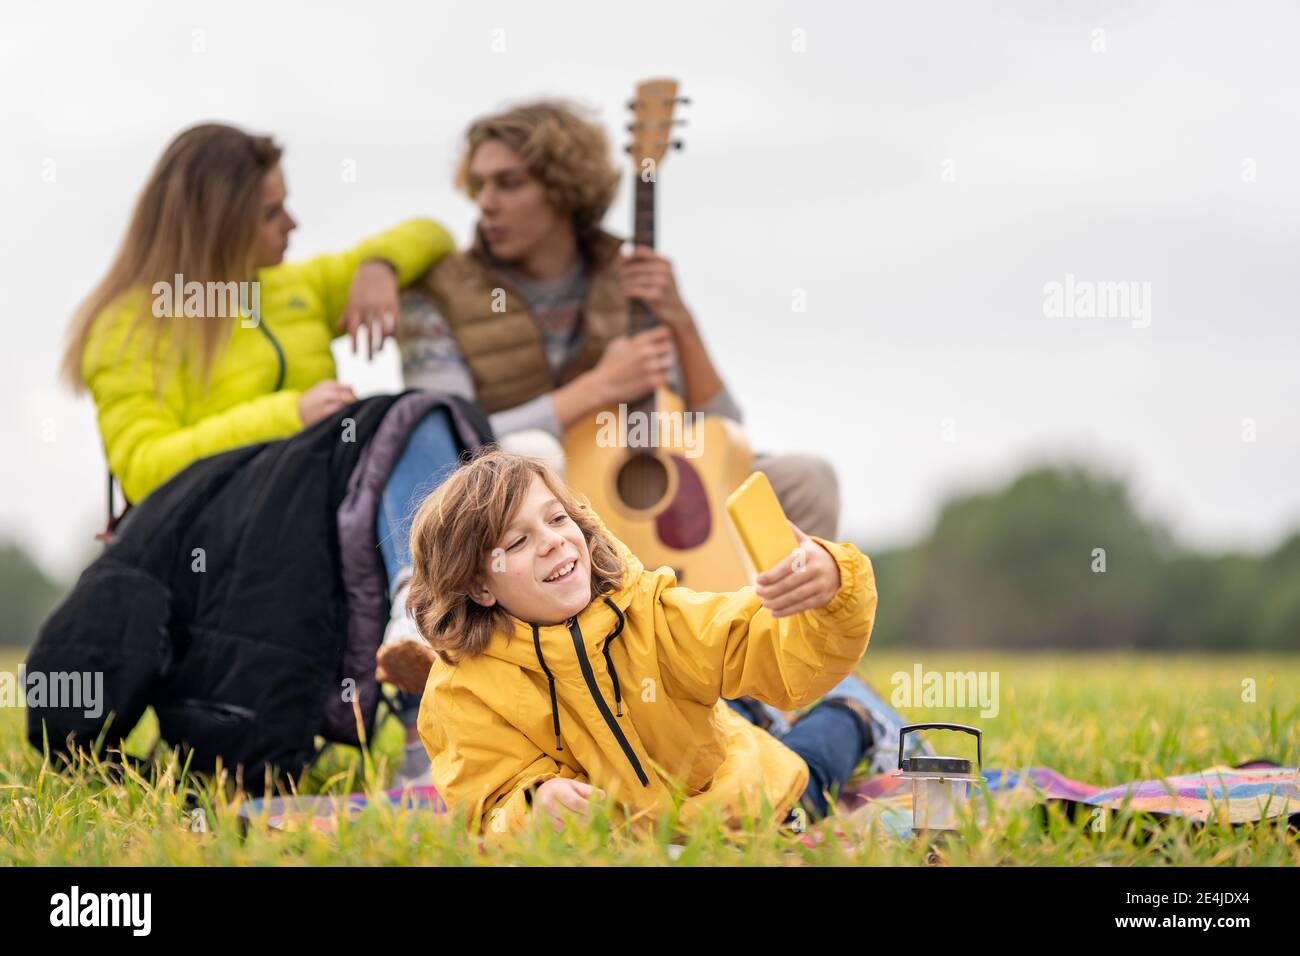 Three siblings camping together on grass Stock Photo